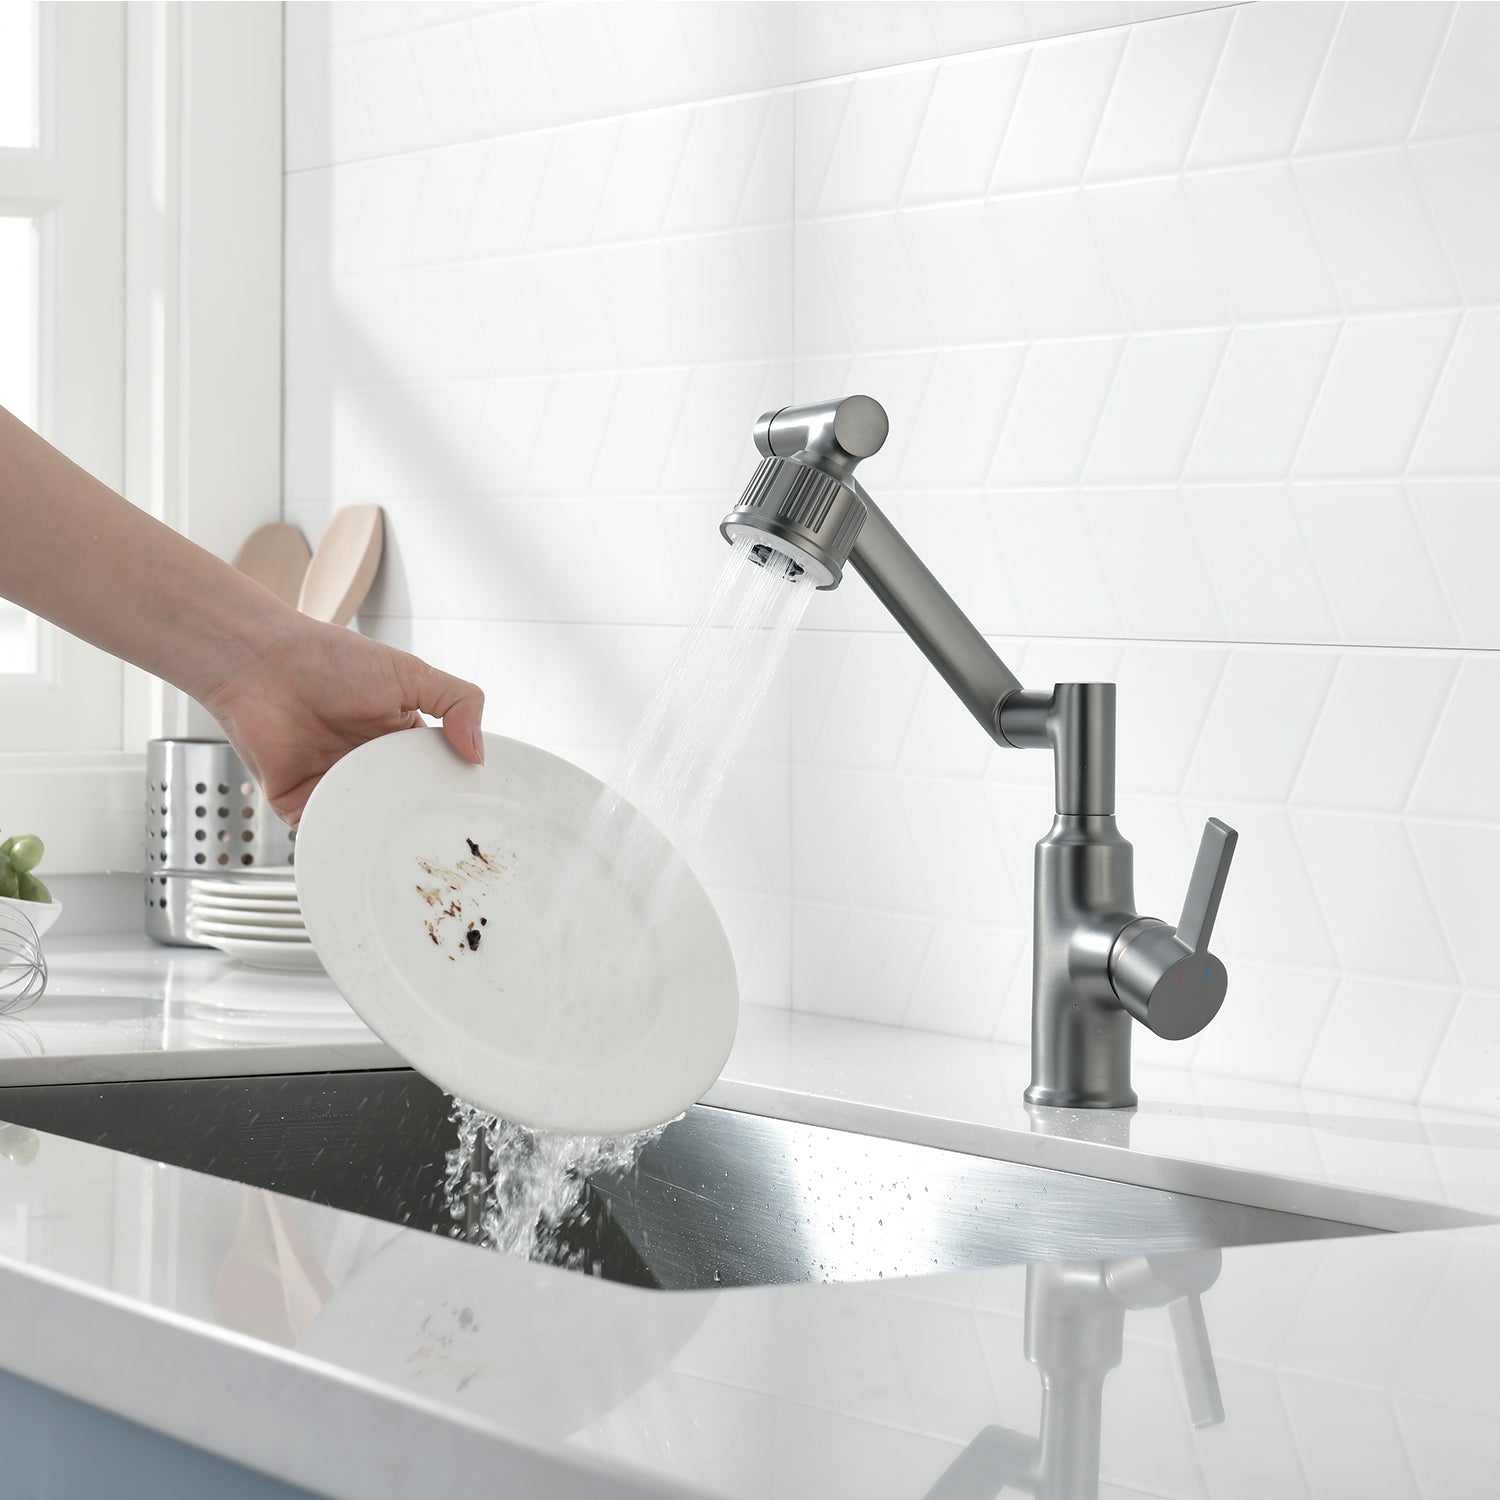 Lefton Smart Rotatable Faucet with 5 Water Outlet Modes-KF2205